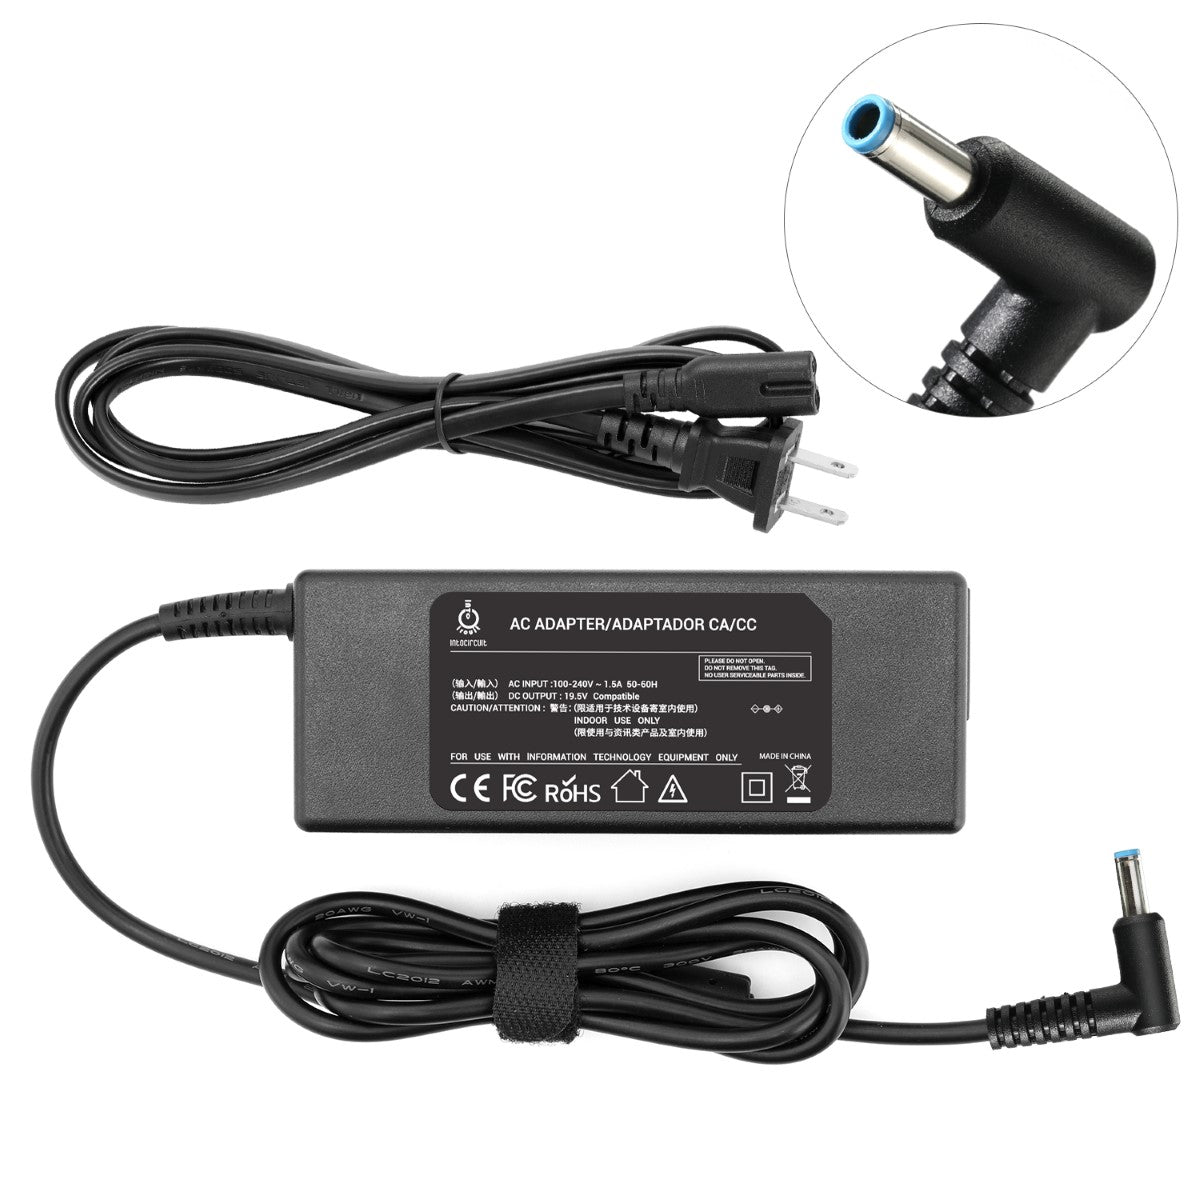 AC Adapter Charger for HP Spectre 13-4193nr Notebook